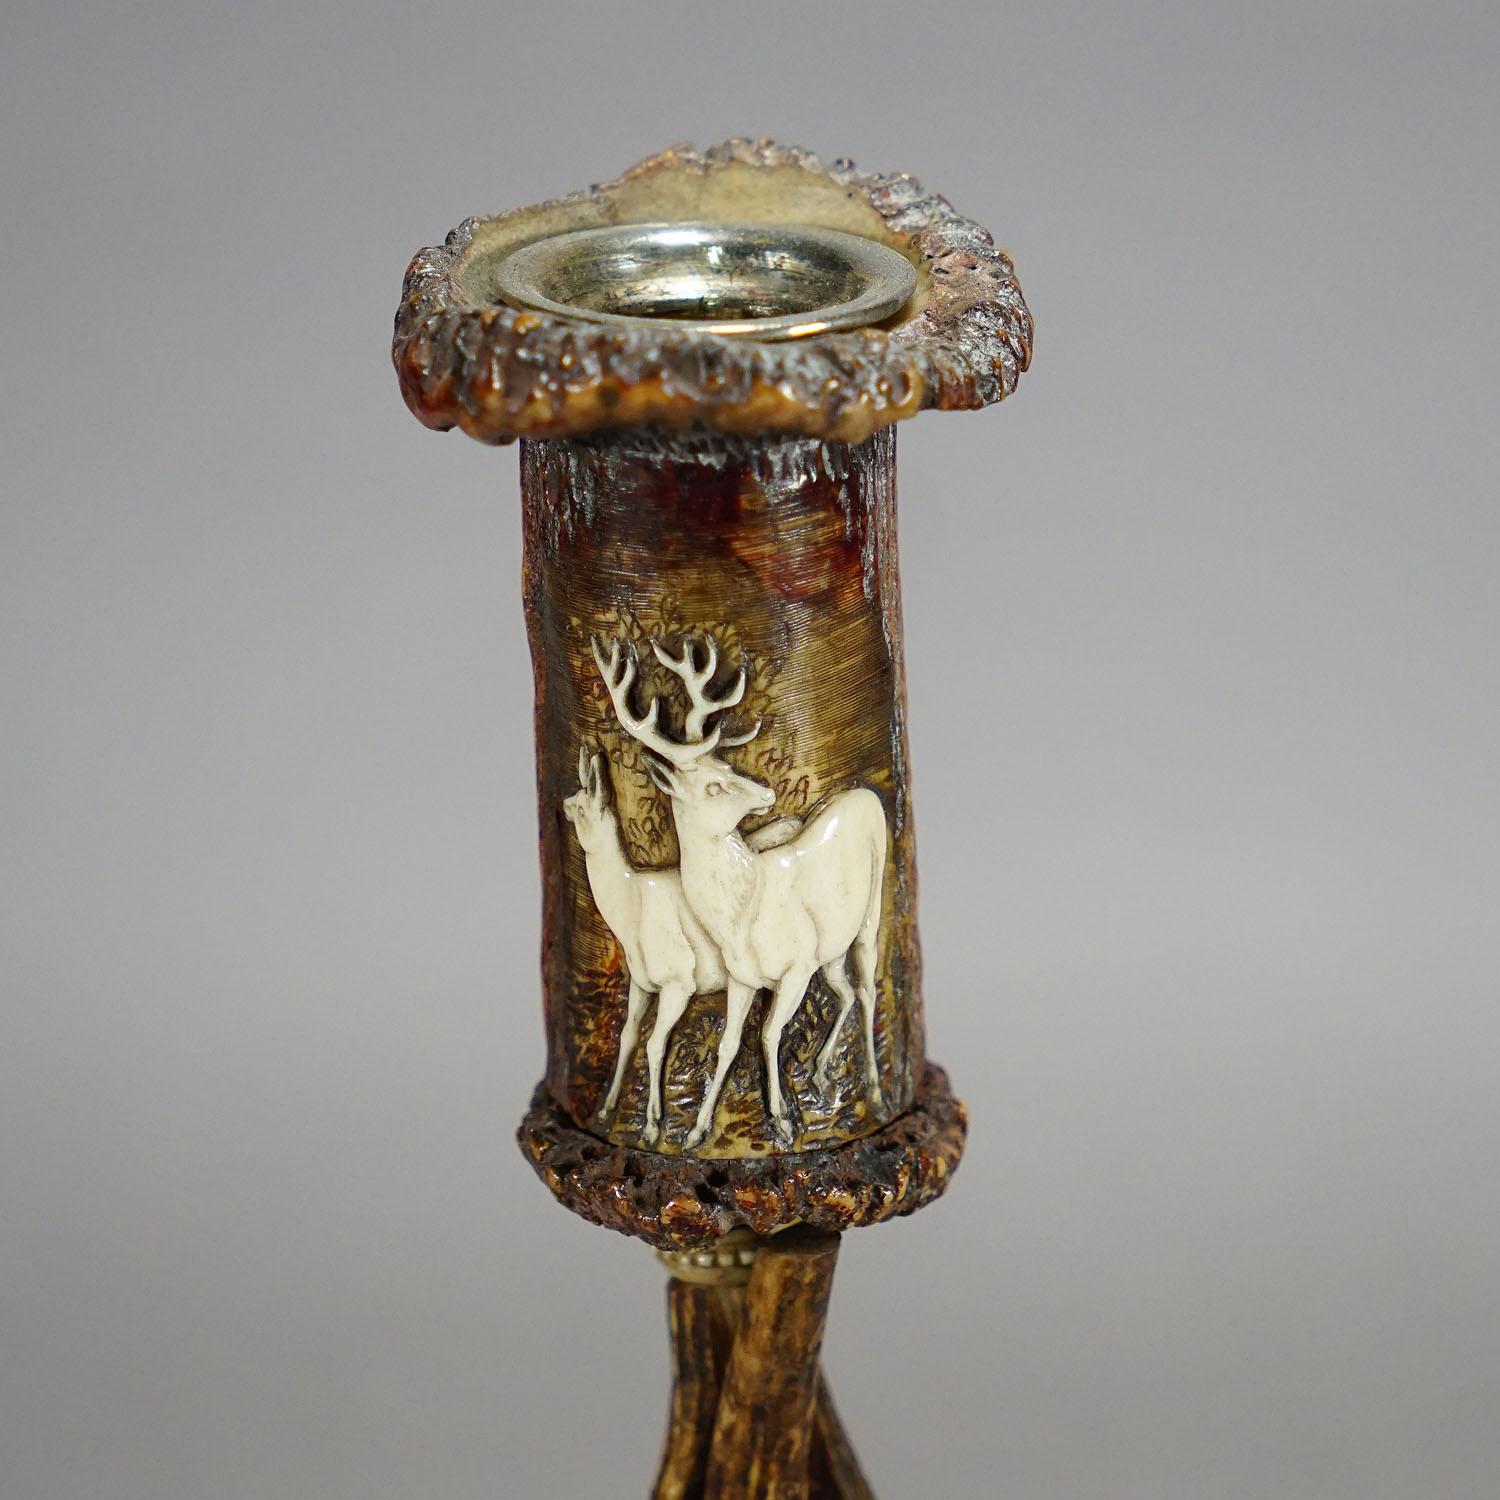 Hand-Carved Stylish Cabin Decor Antler Candle Holder with Deer Carving, Germany ca. 1900 For Sale